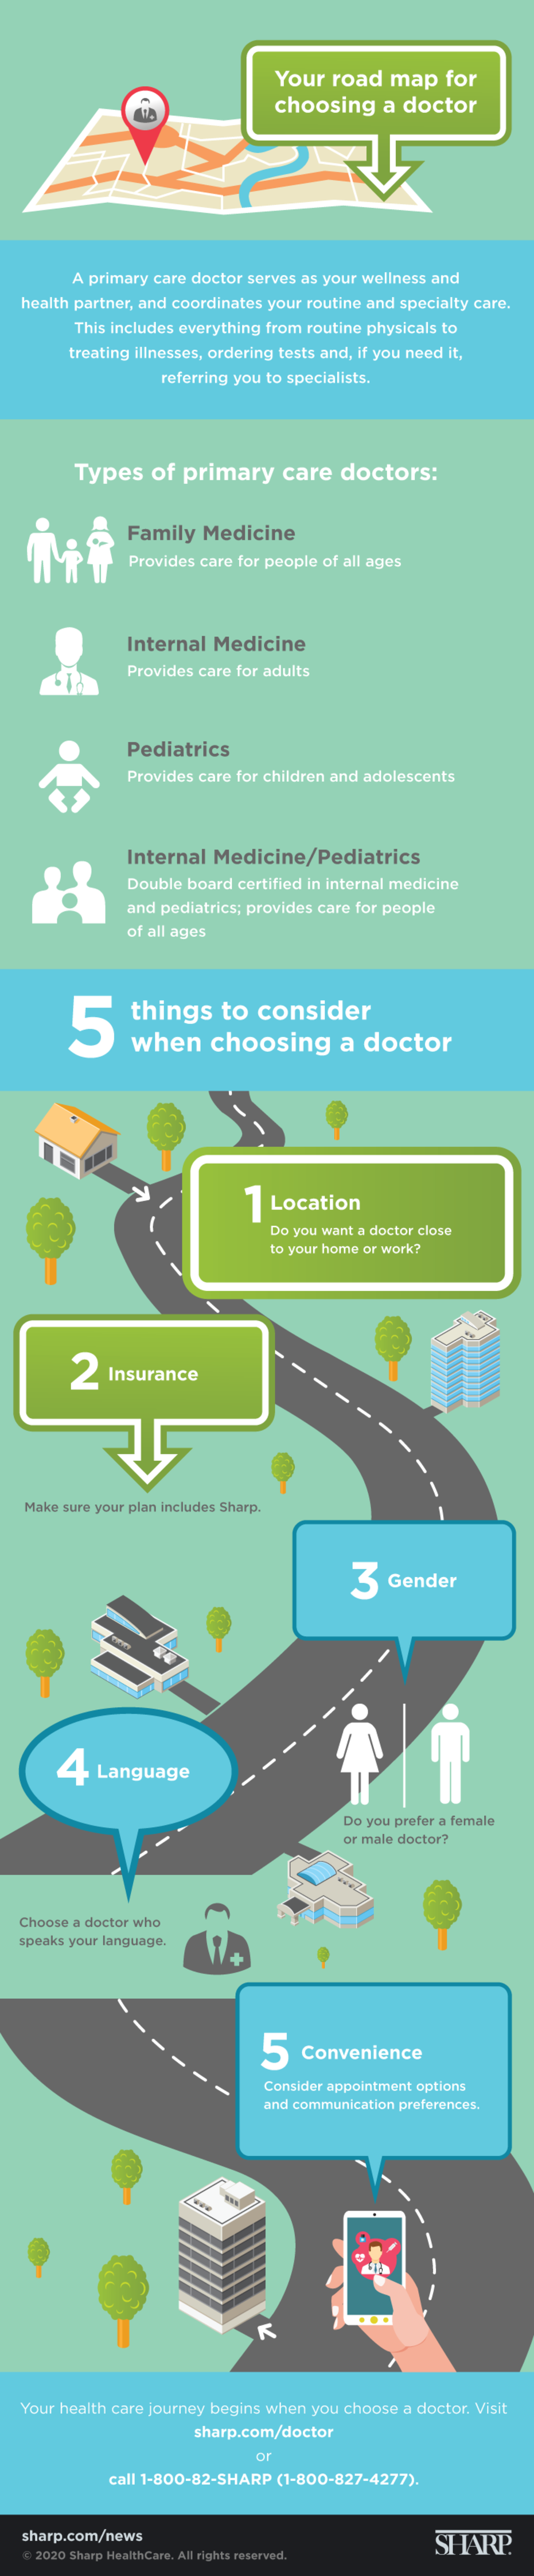 Road map to finding a doctor infographic 030420 UPDATED PNG